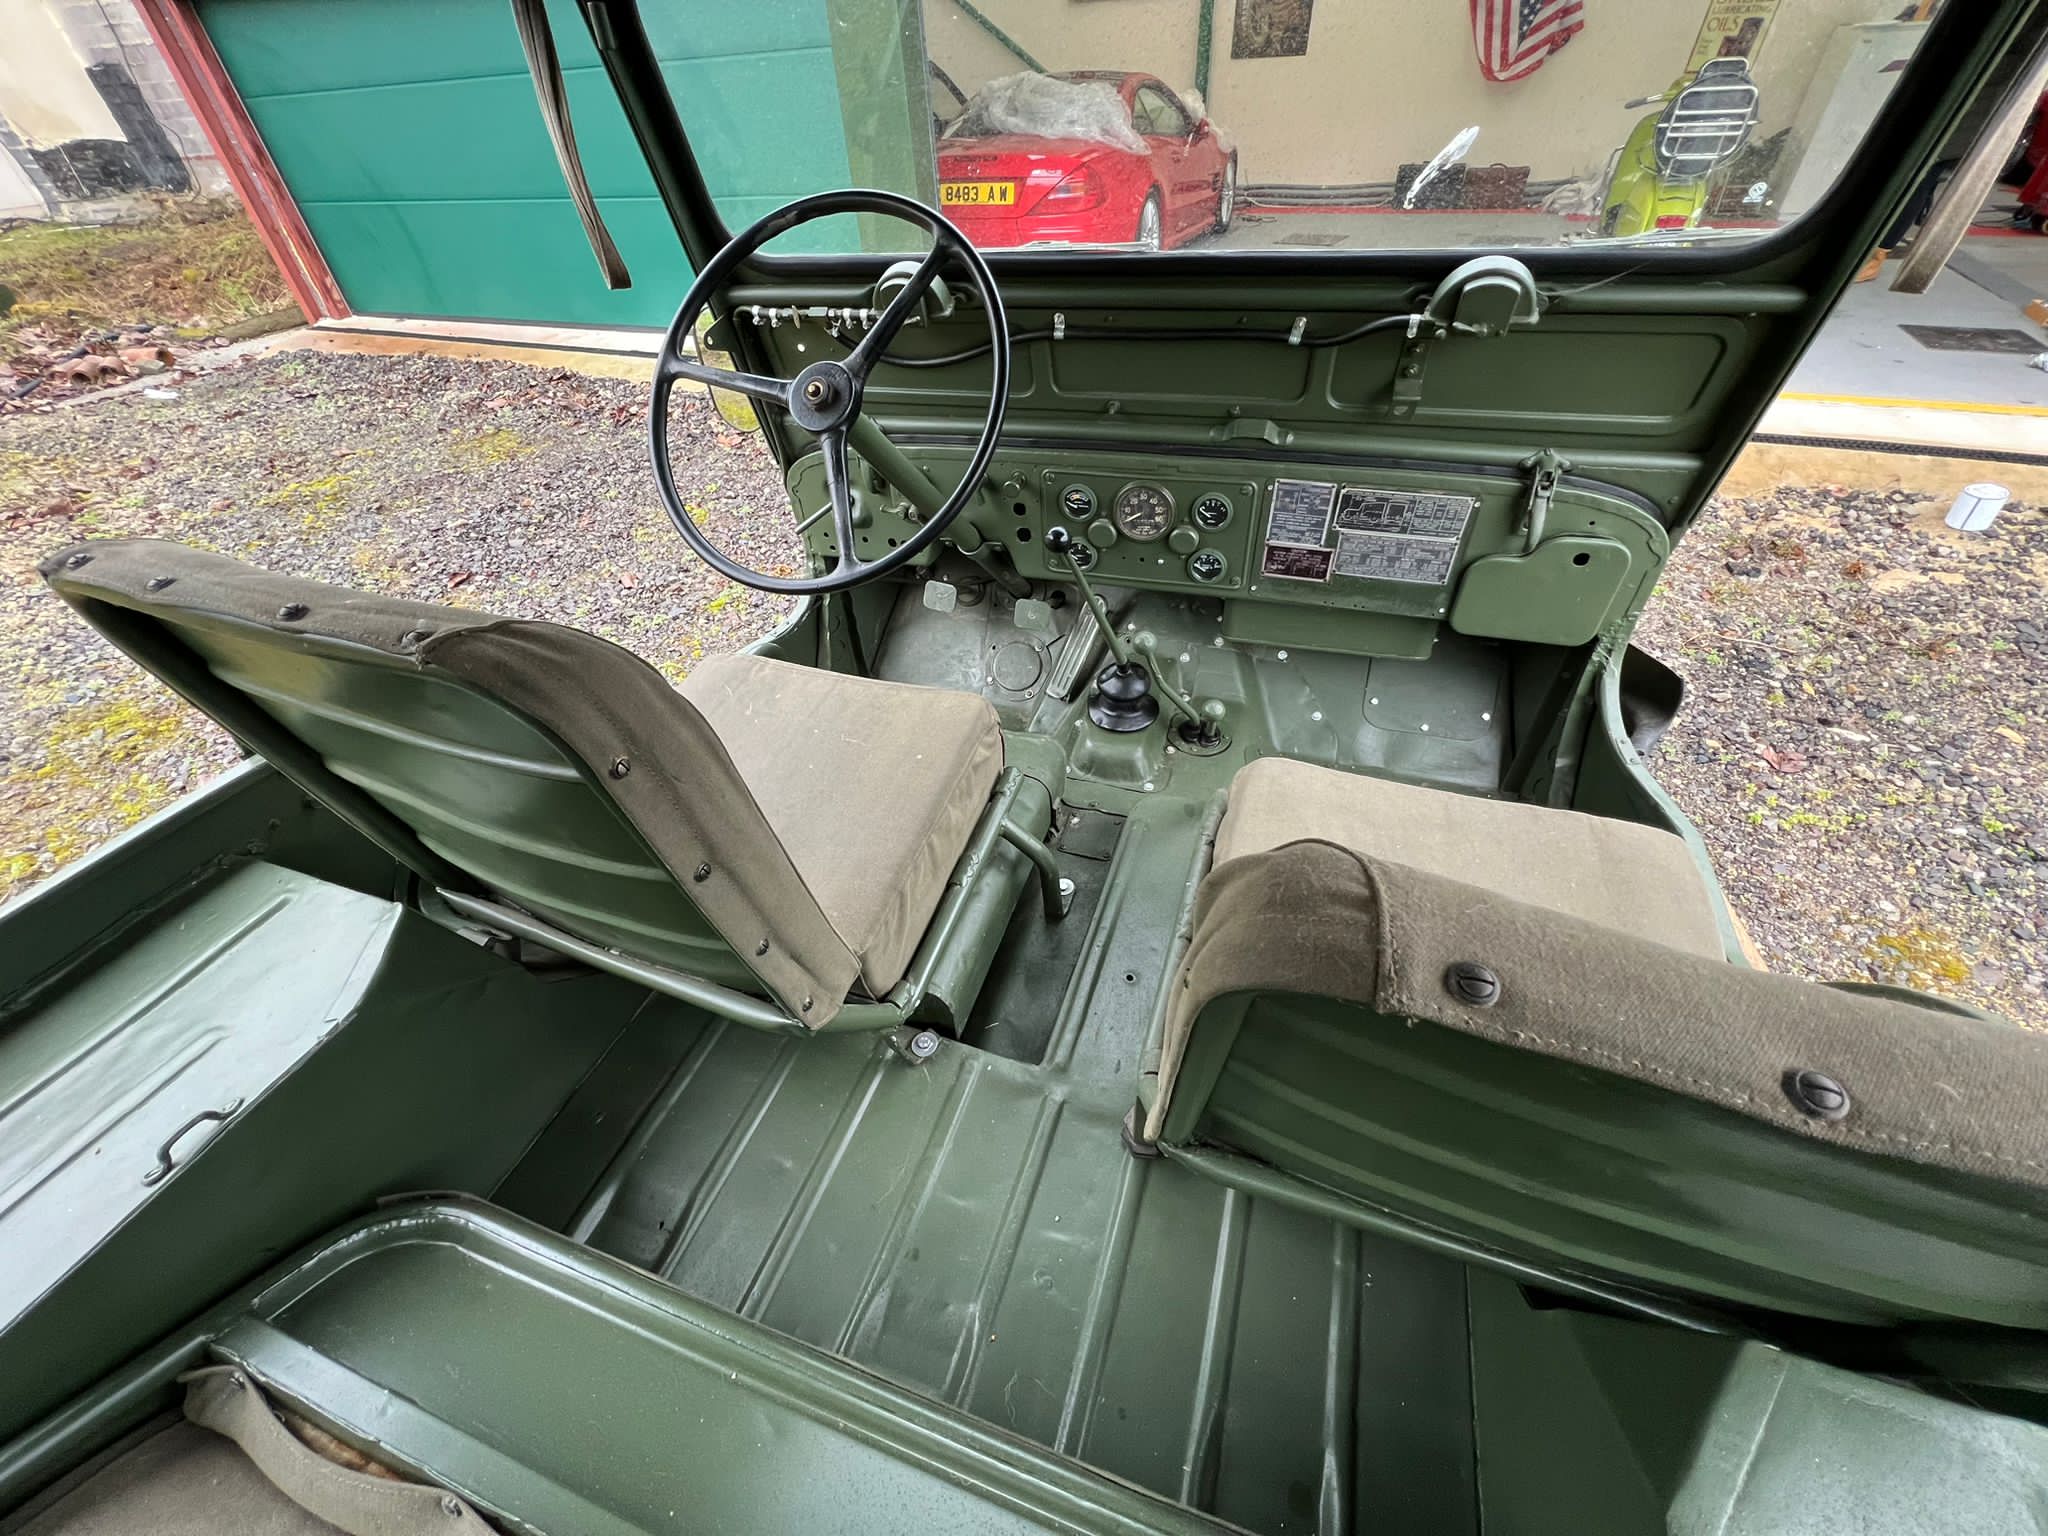 Willys Jeep Model M38 c1947 - Image 13 of 13